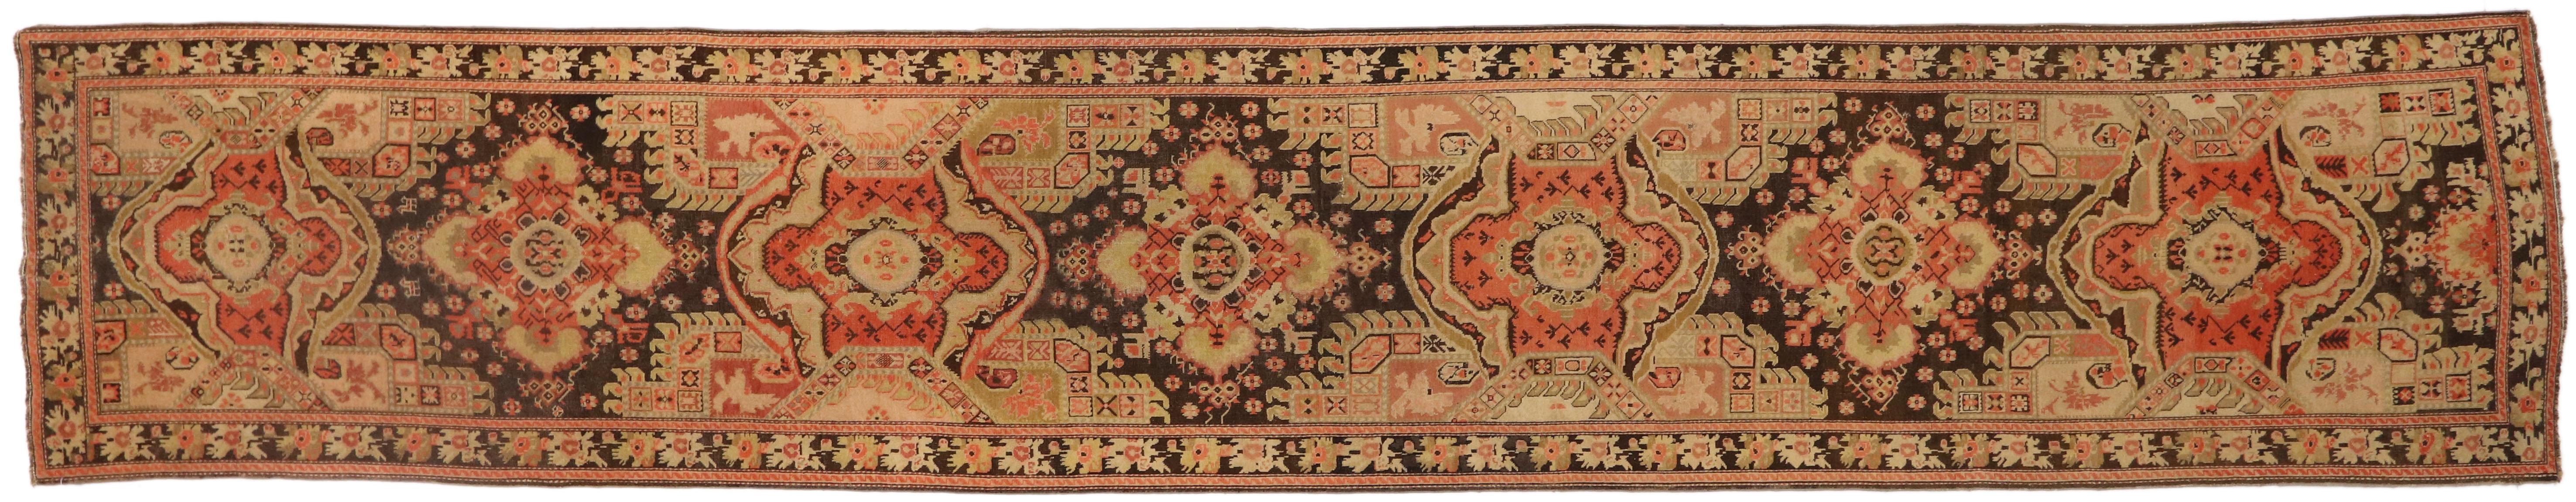 Extra-Long Antique Caucasian Karabakh Runner with Warm Artisinal Style For Sale 1